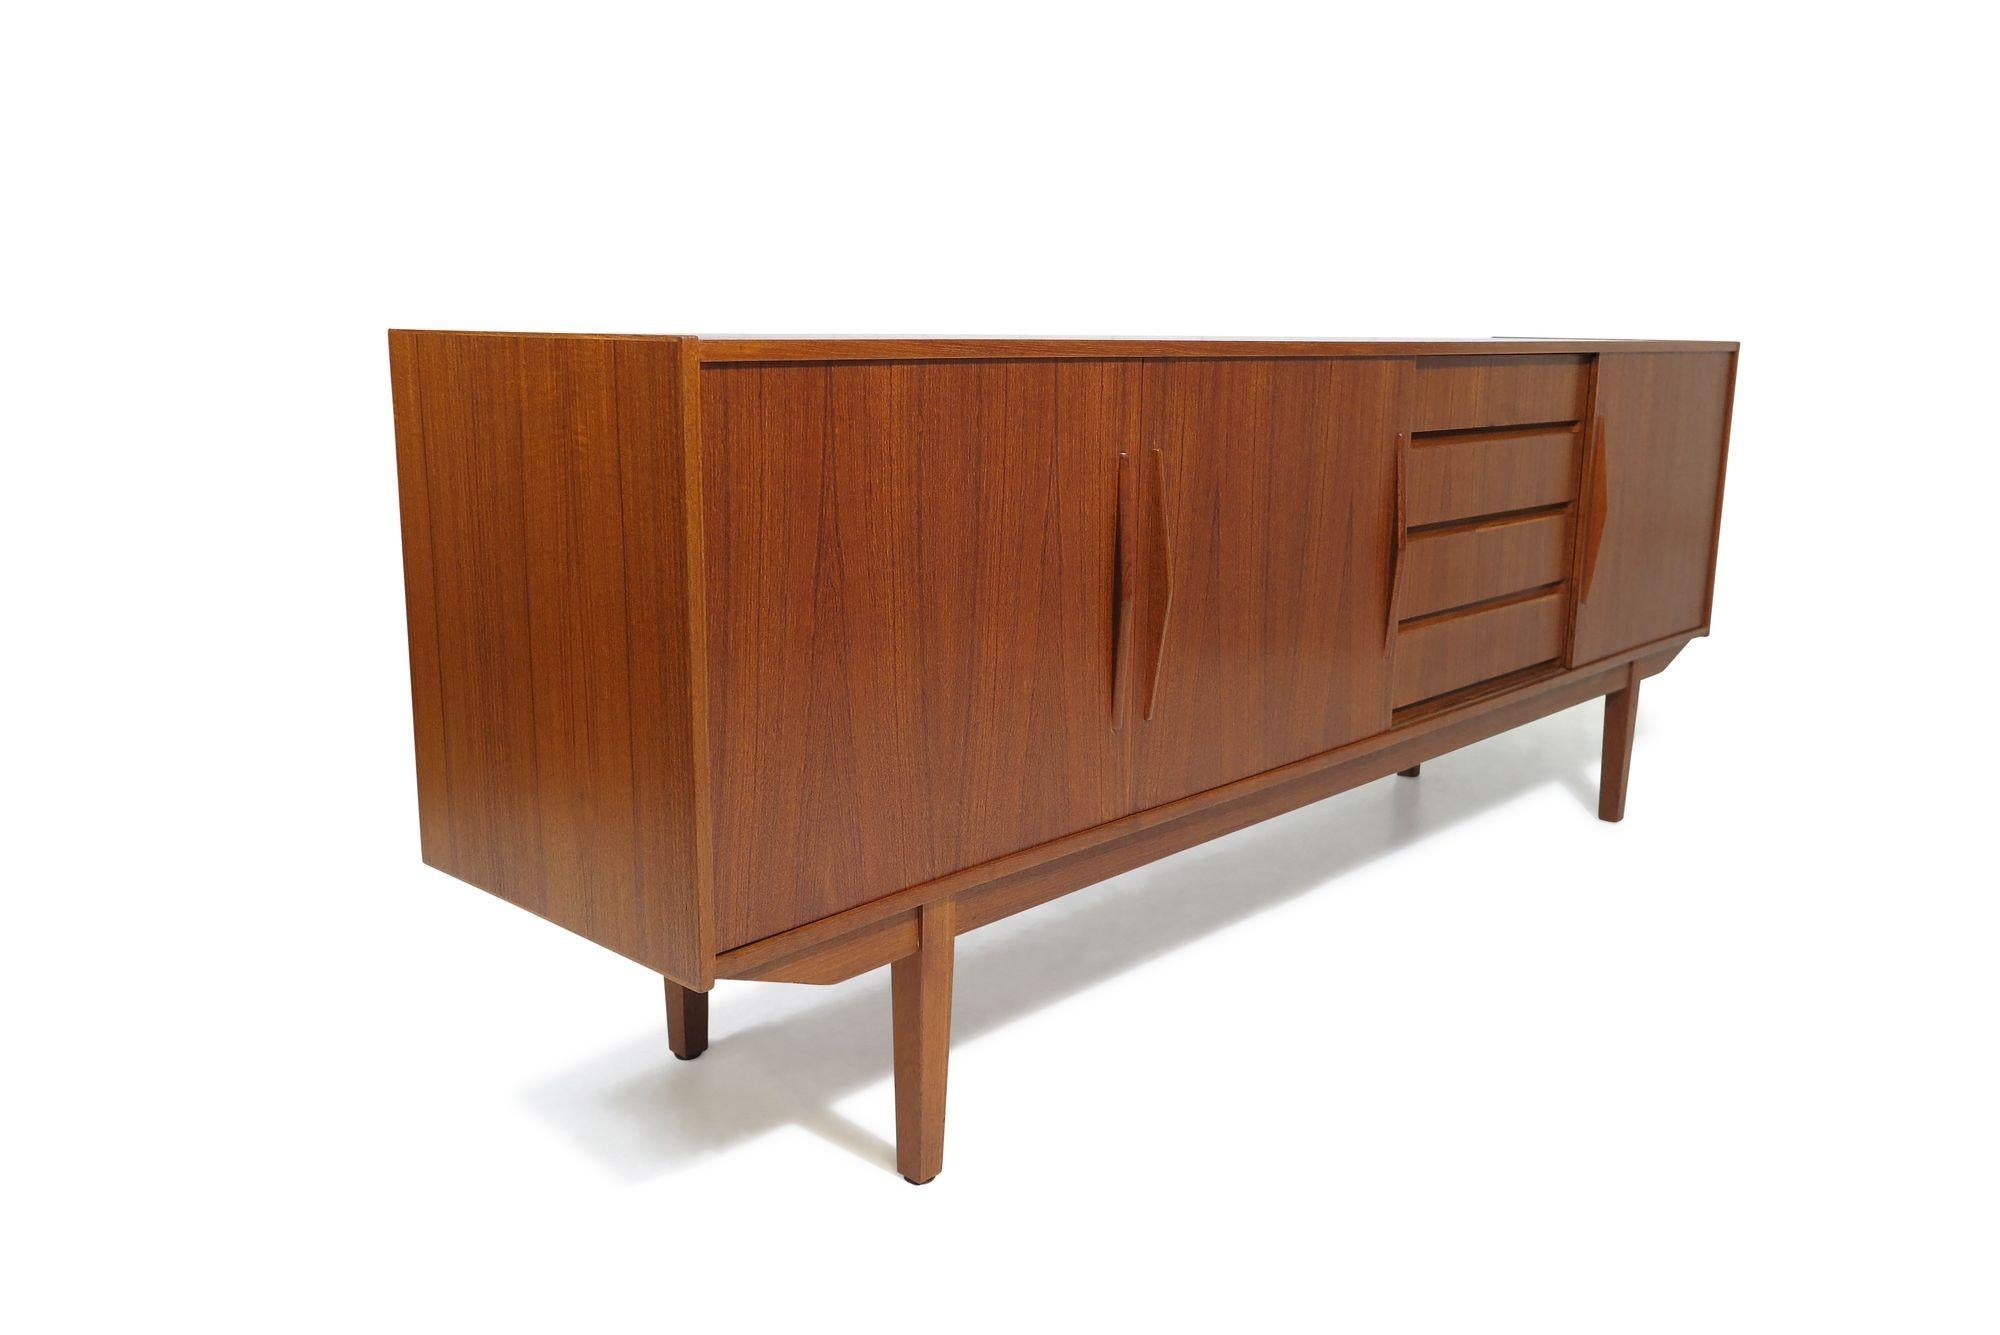 1960's Mid-century Danish Teak Credenza with Doors and Drawers For Sale 1